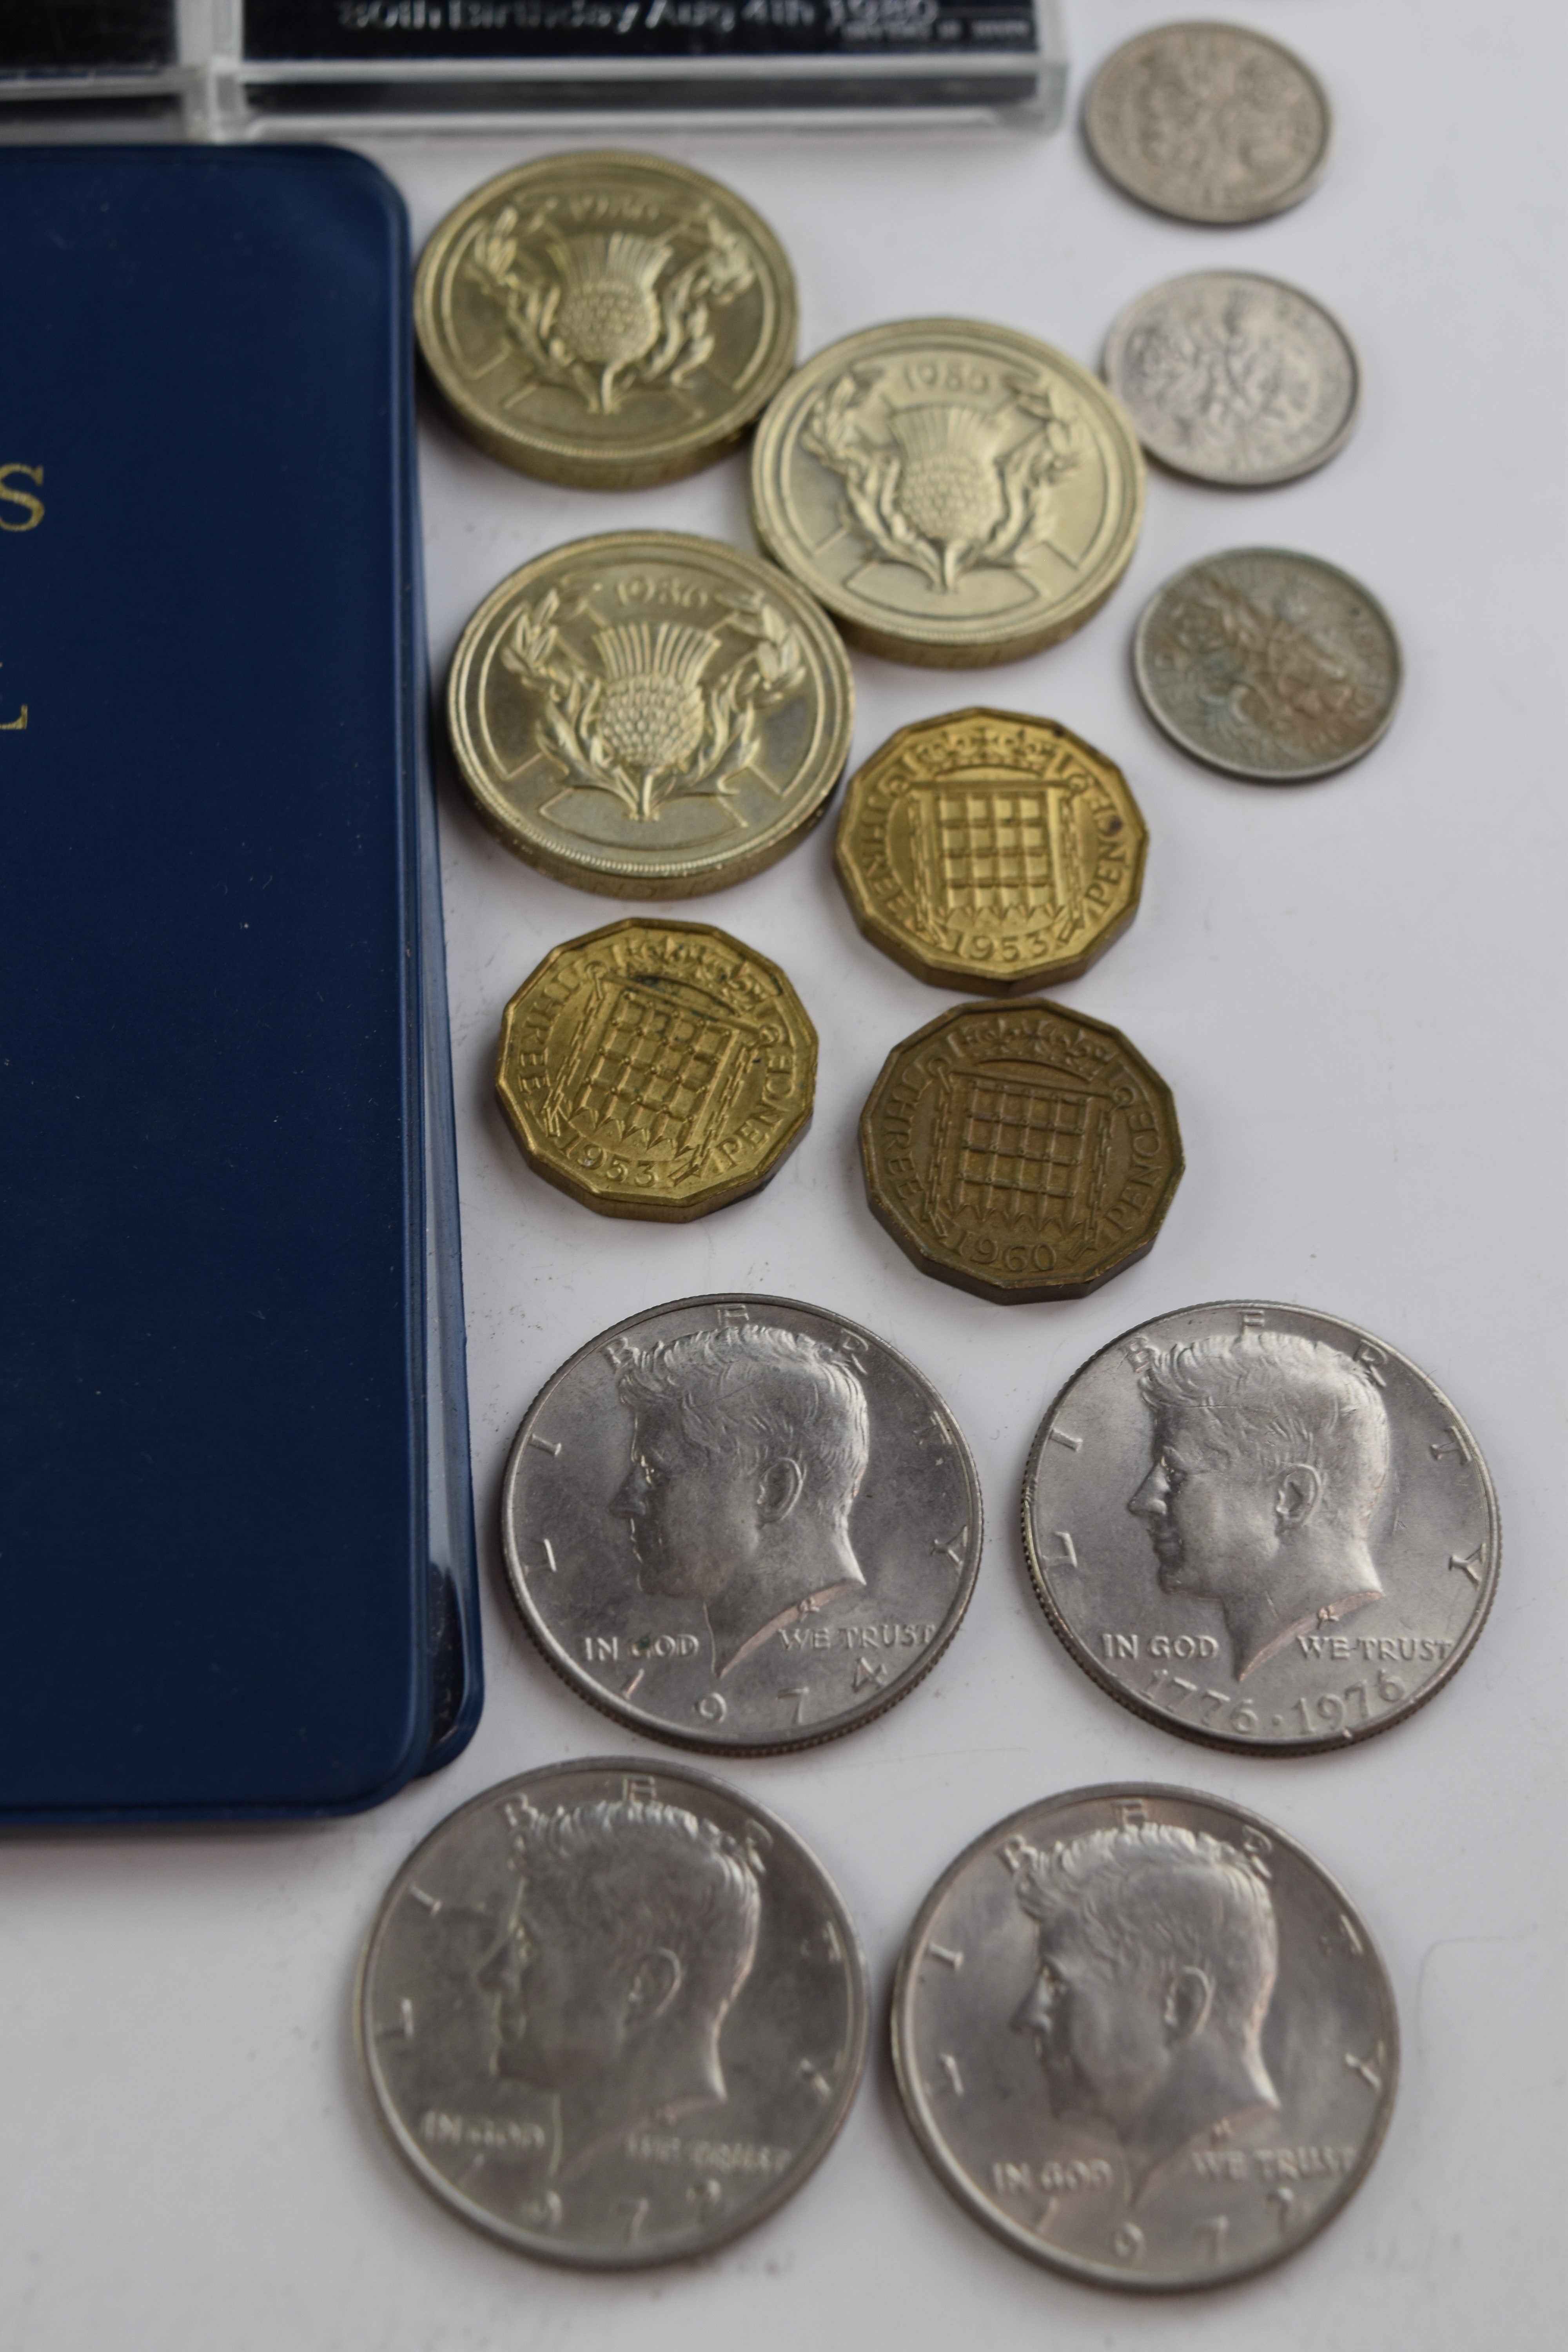 Vintage cash box containing modern crowns, £2 coins, Kennedy half dollars and approximately 41g of - Image 6 of 7